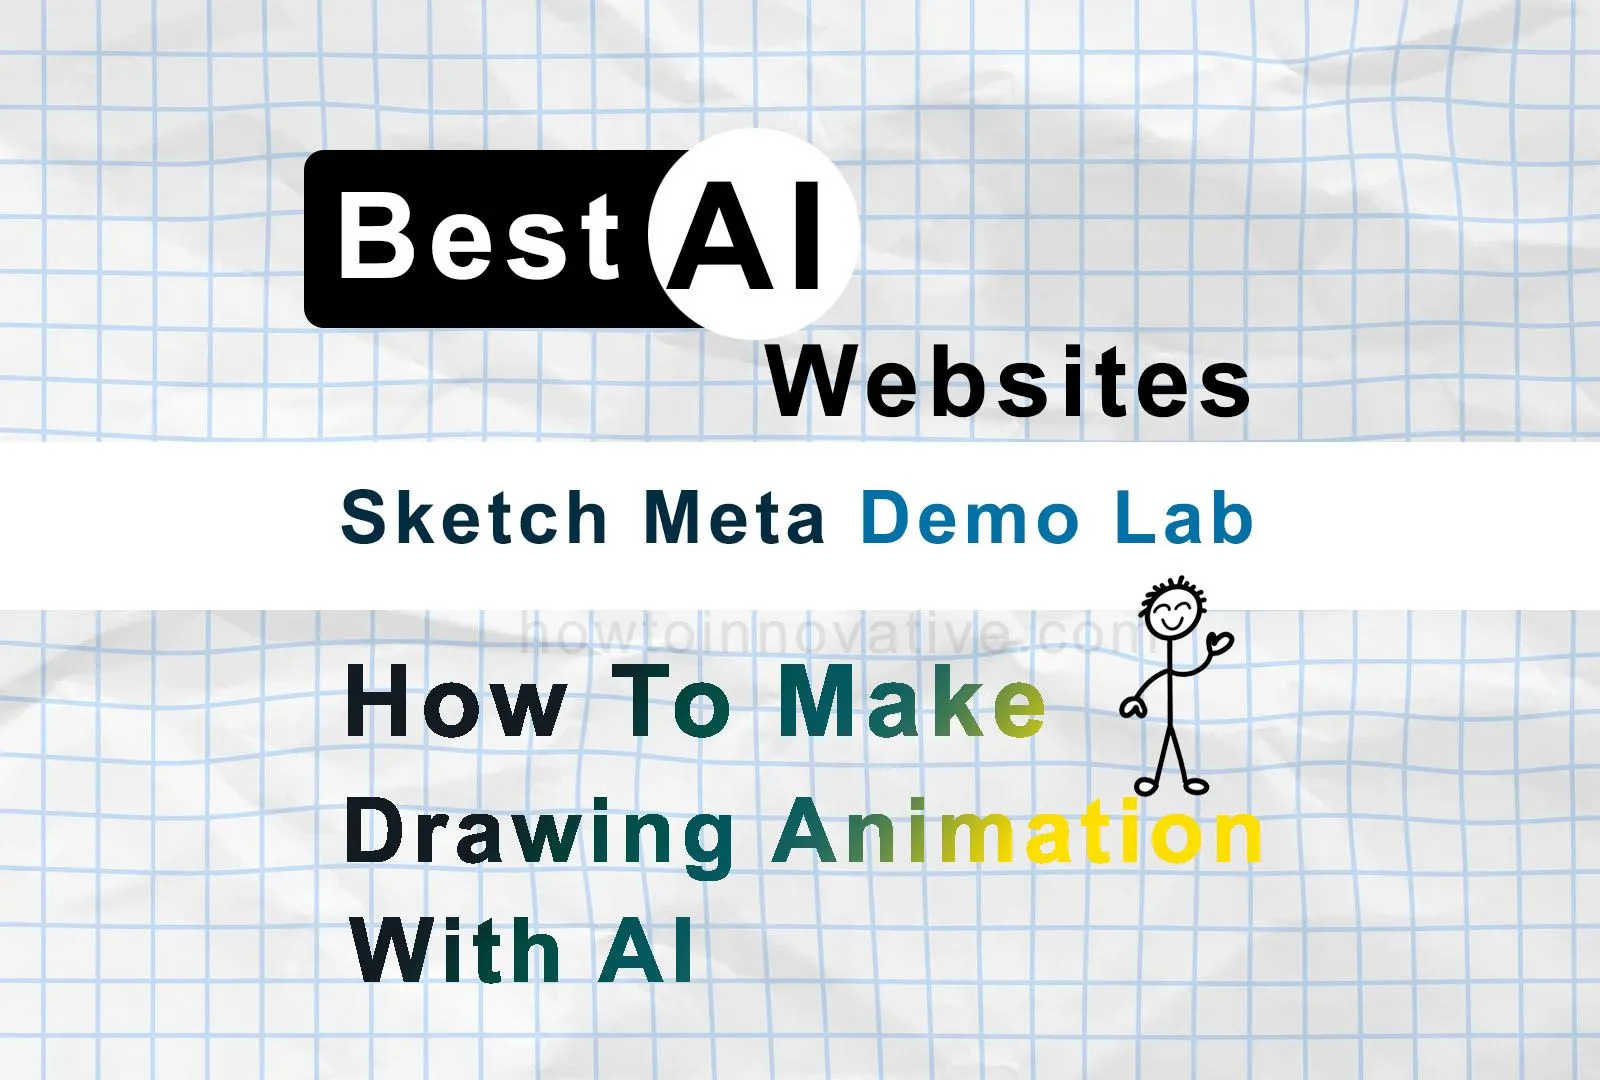 Best AI Websites - How To Make Drawing Animation With AI